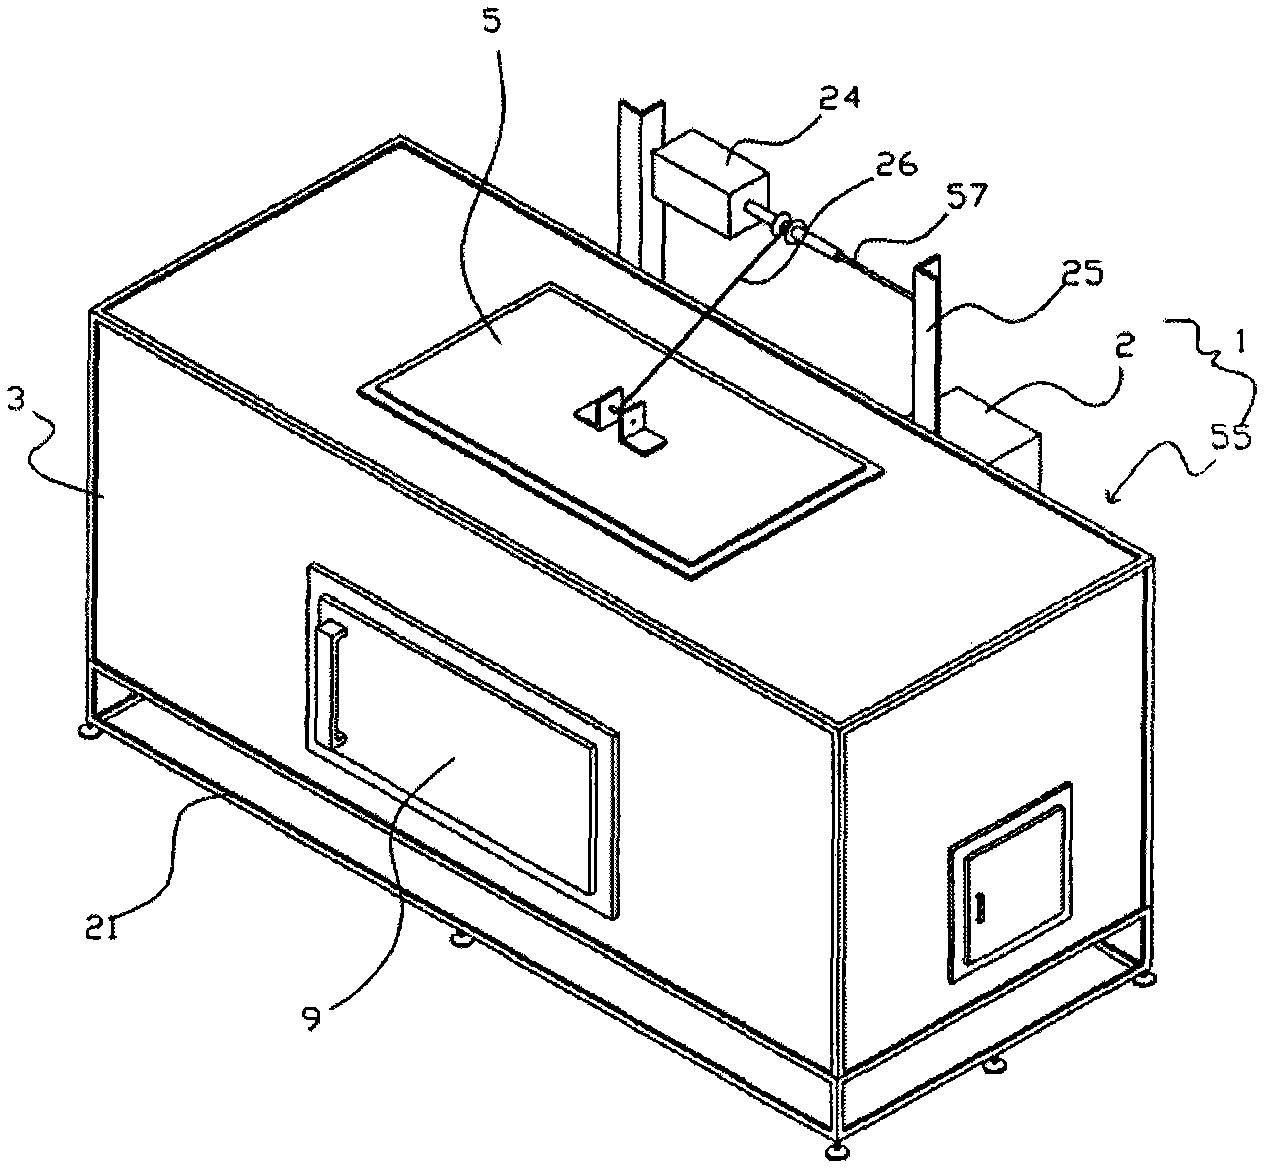 Apparatus for heat-treating waste matters